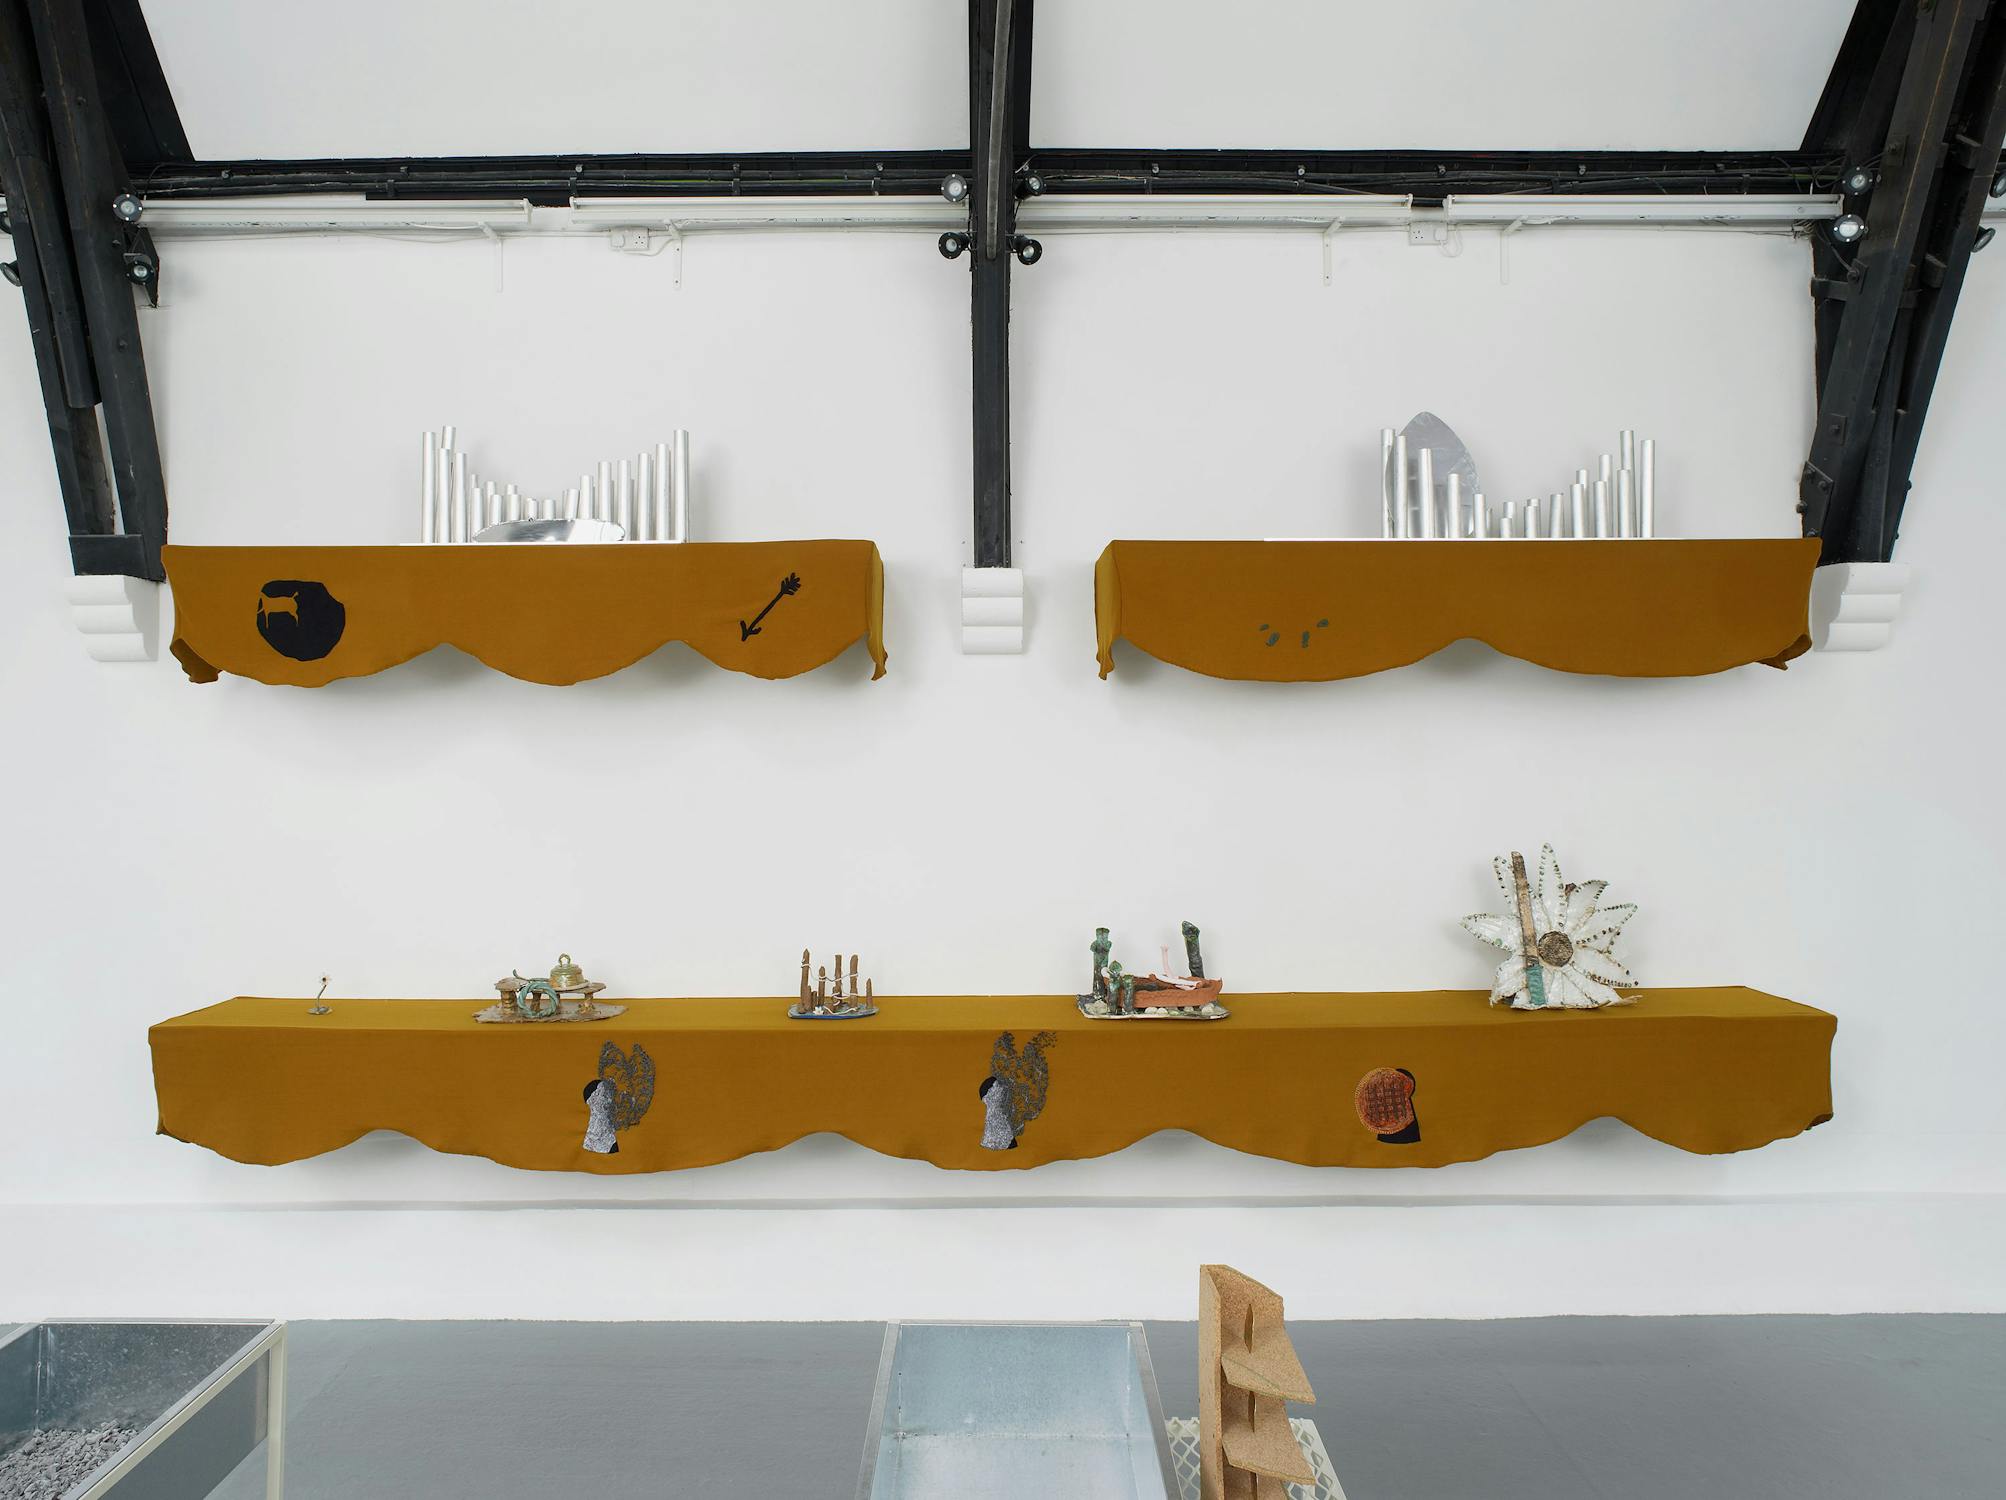 A view of an artwork installation comprising three wall-mounted shelves draped with mustard-coloured fabric. The shelves display various small artworks and objects.